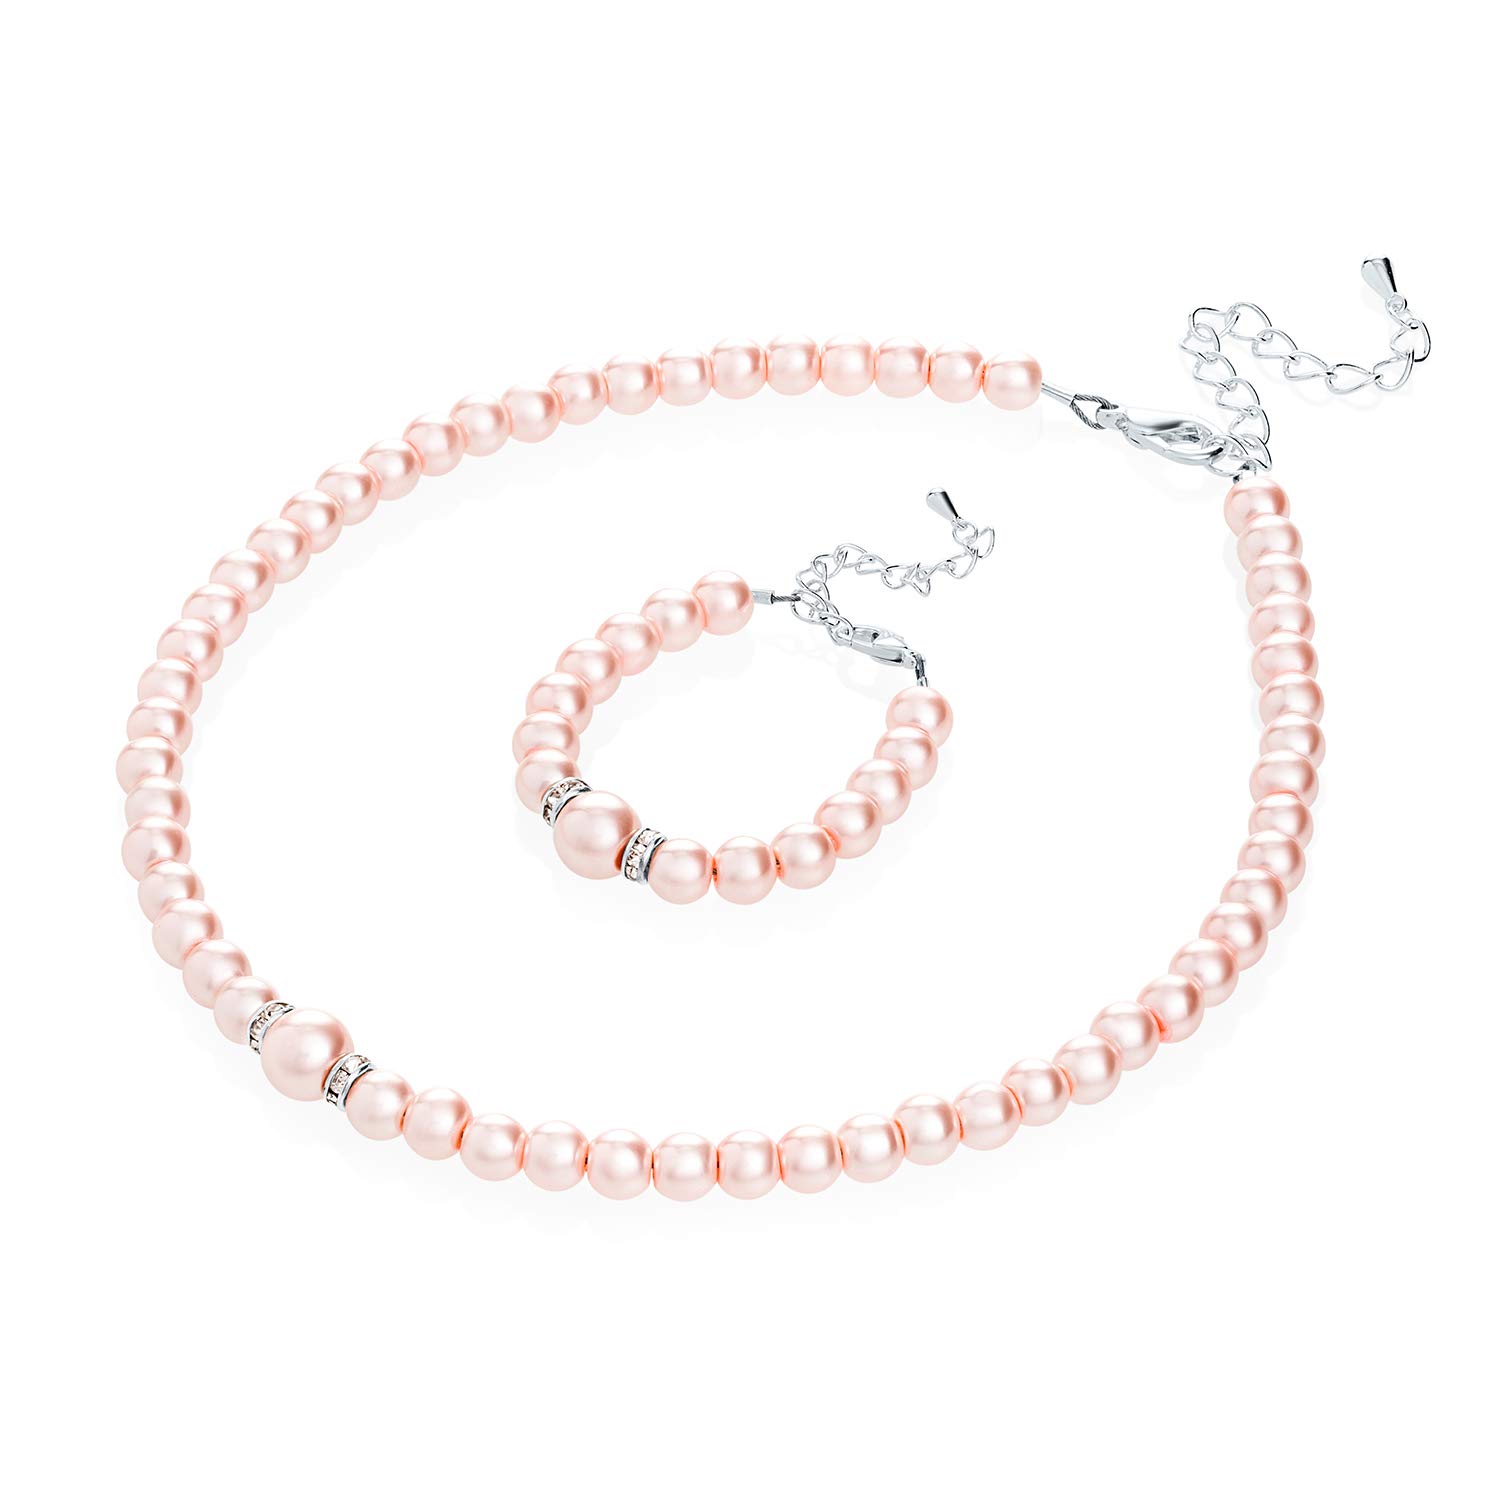 Crystal Dream Elegant Pink Simulated Pearl Toddler Girl Necklace and Bracelet Stylish Gift Set (GS-P-P-ALL)